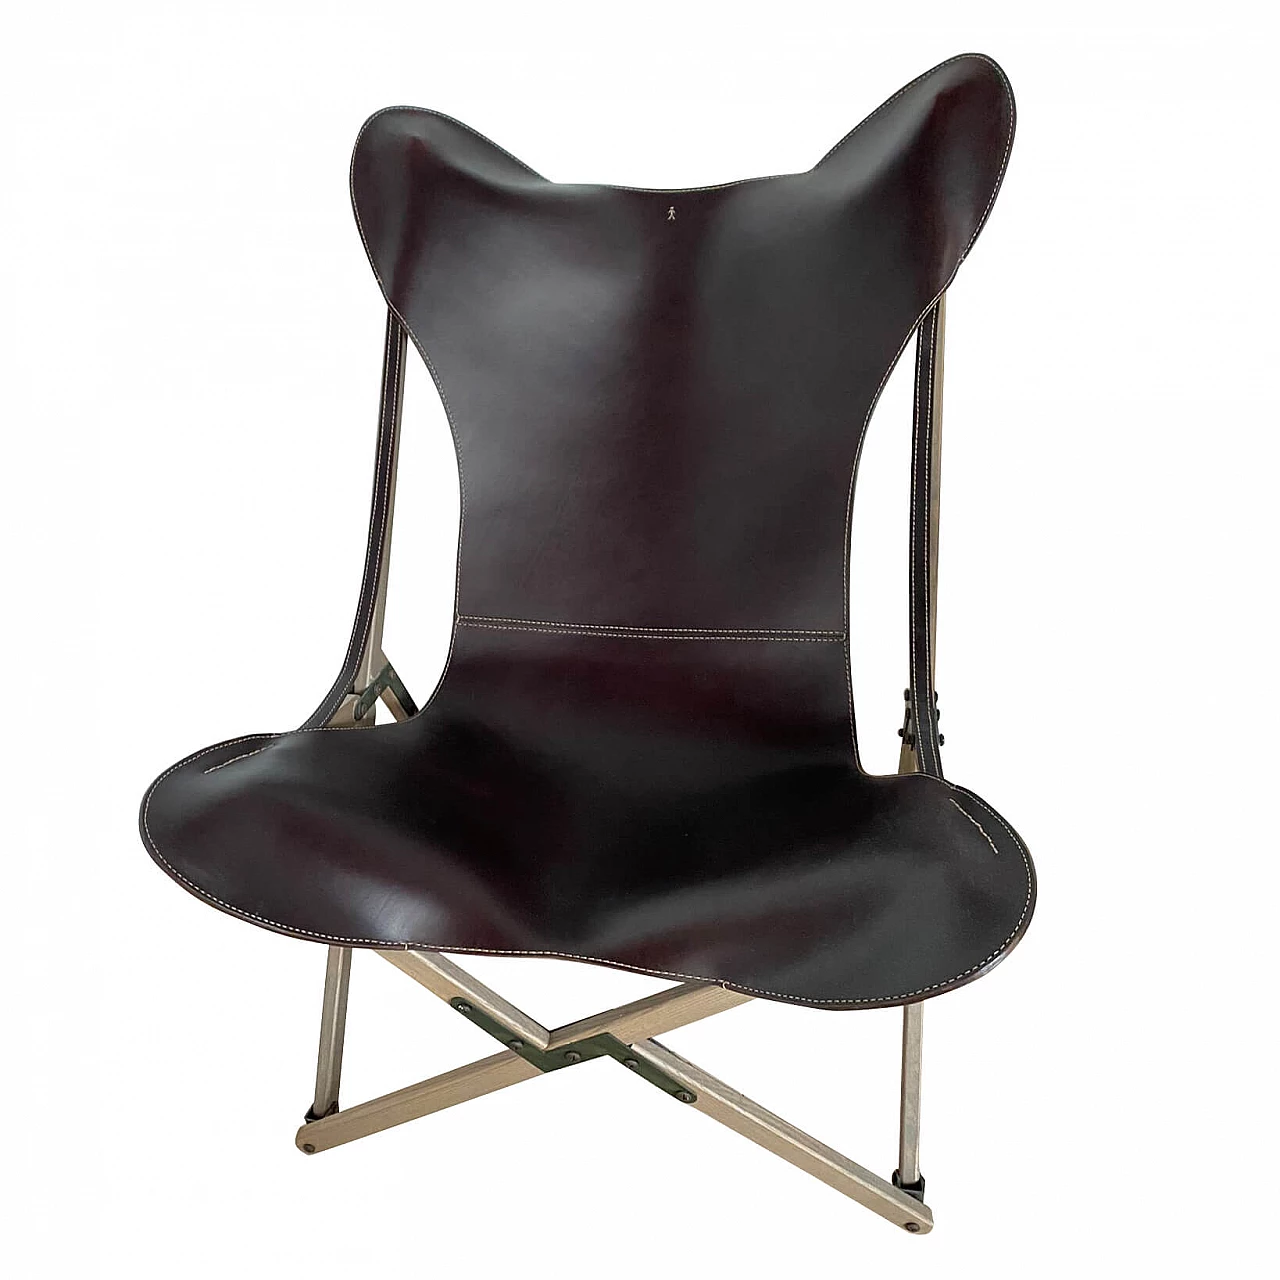 Milady leather butterfly armchair by Henry Beguelin 1310697